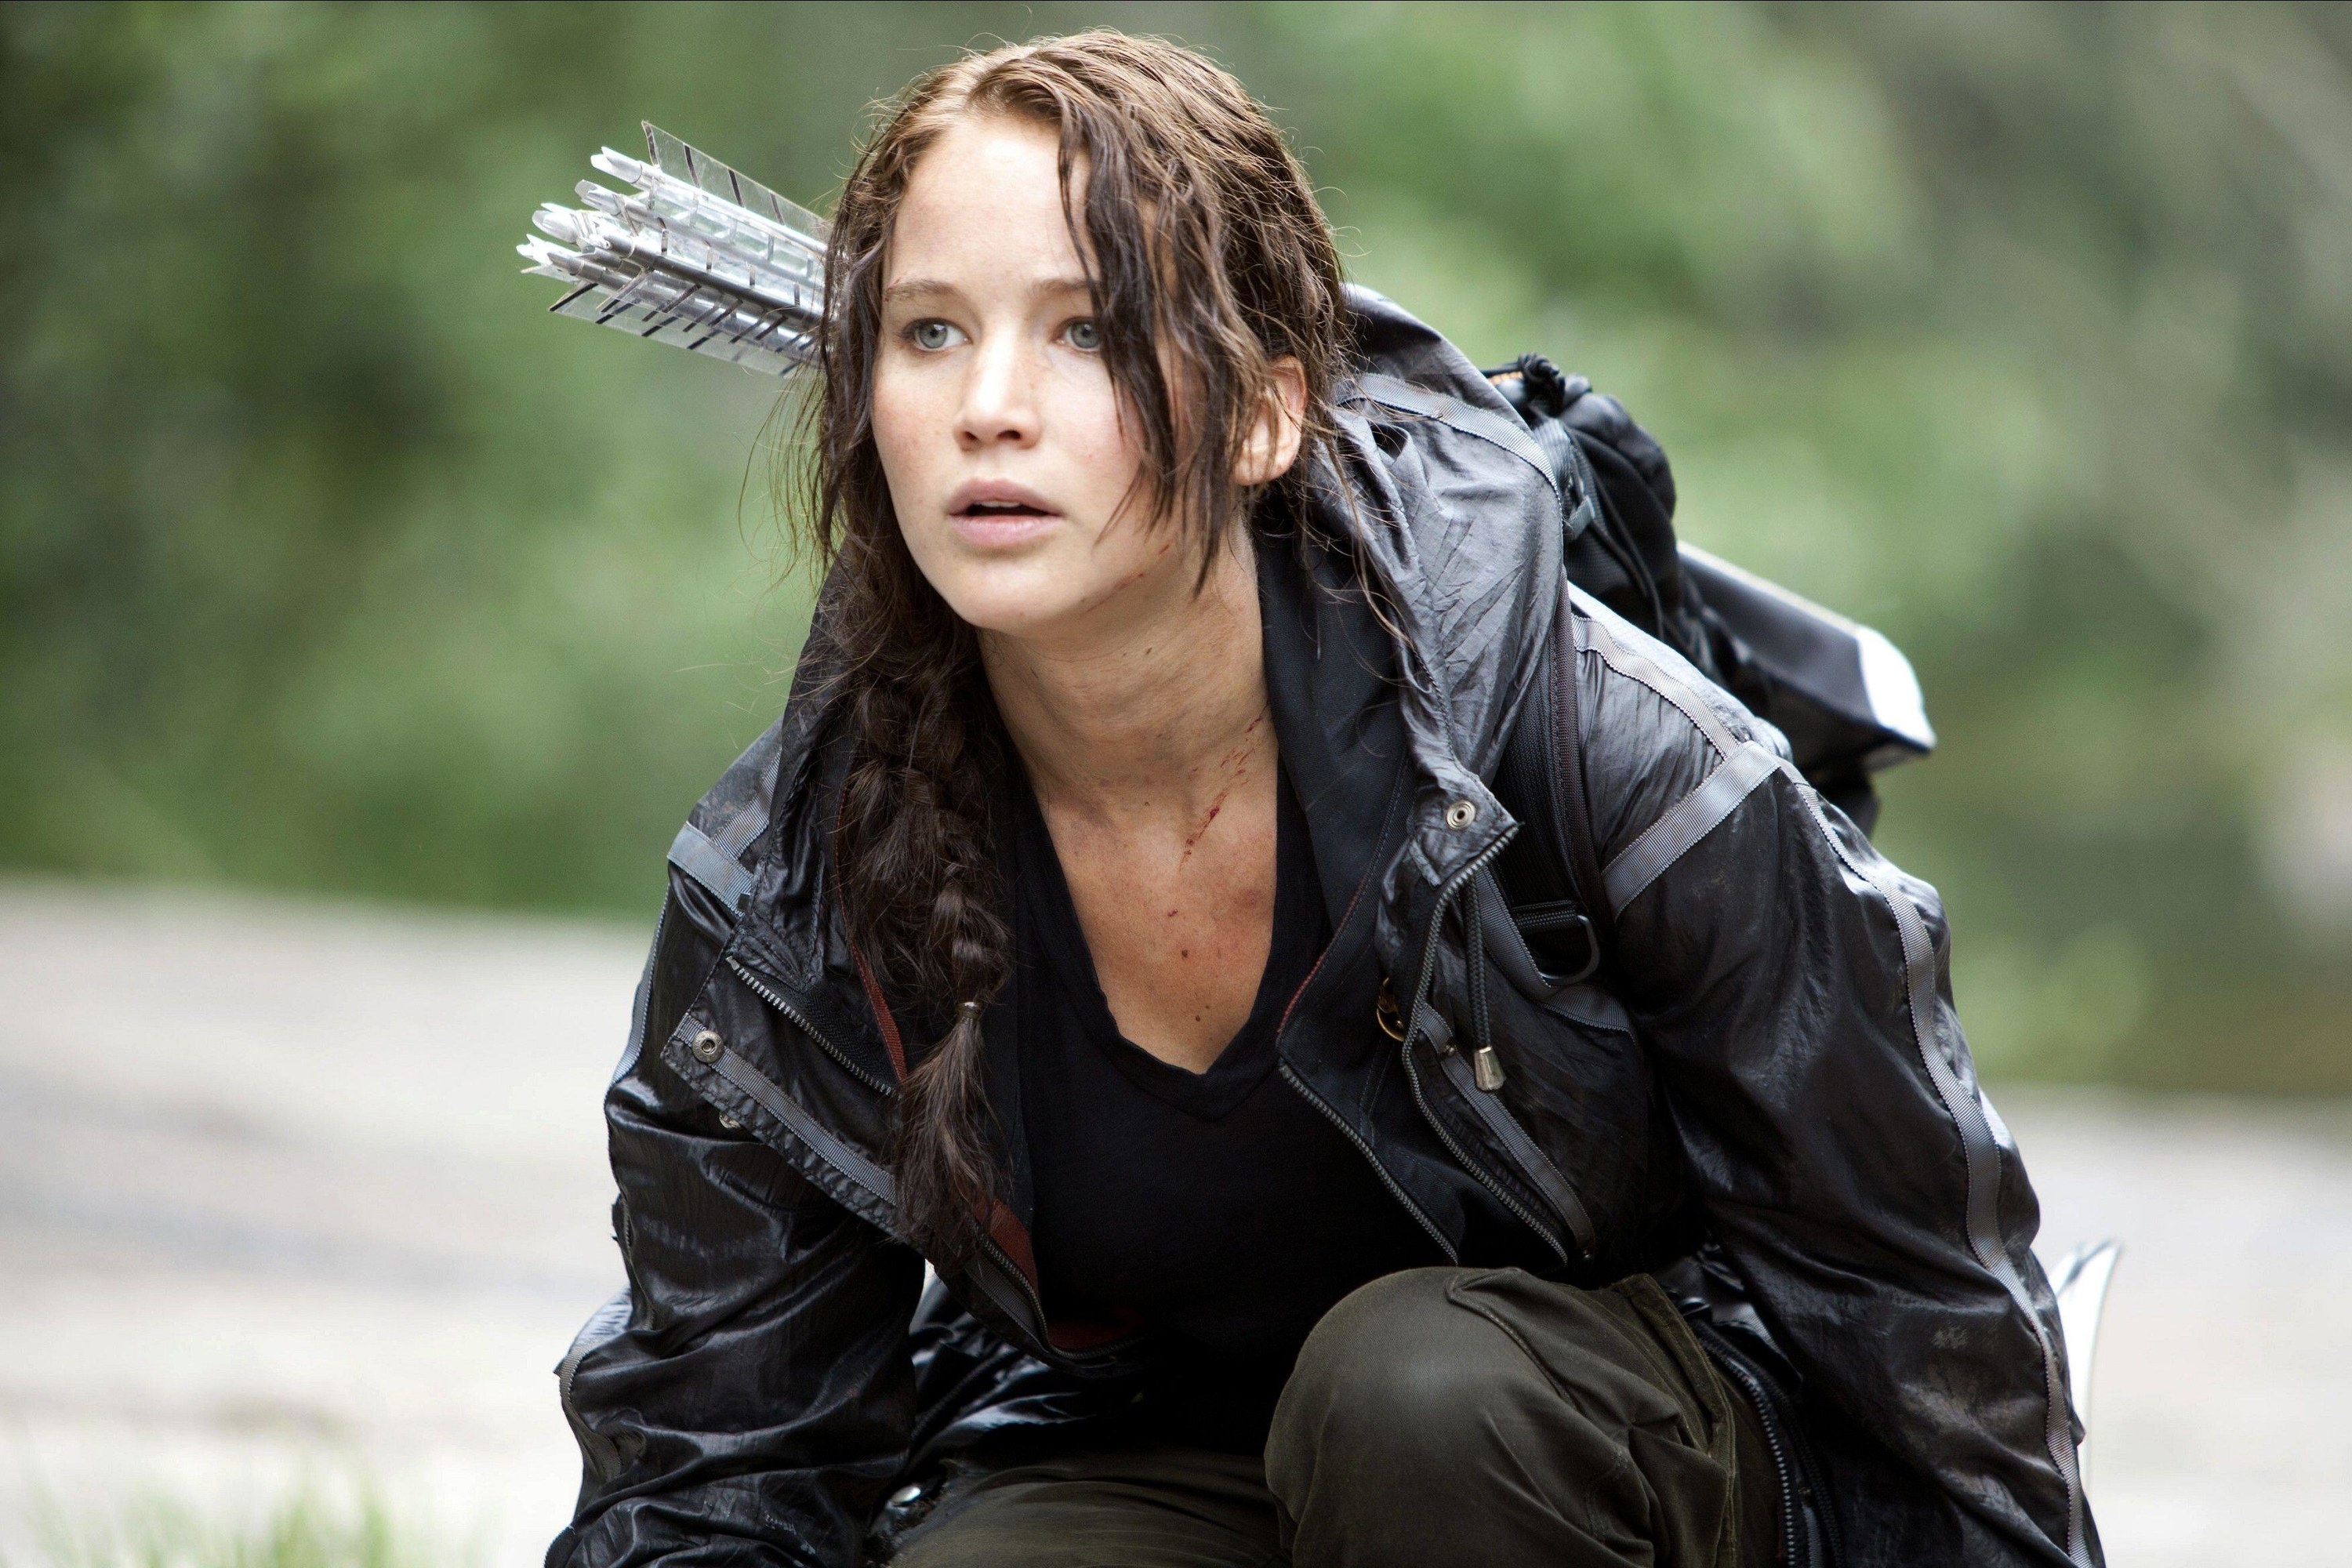 Jennifer Lawrence kneels in a windbreaker while looking visibly concerned